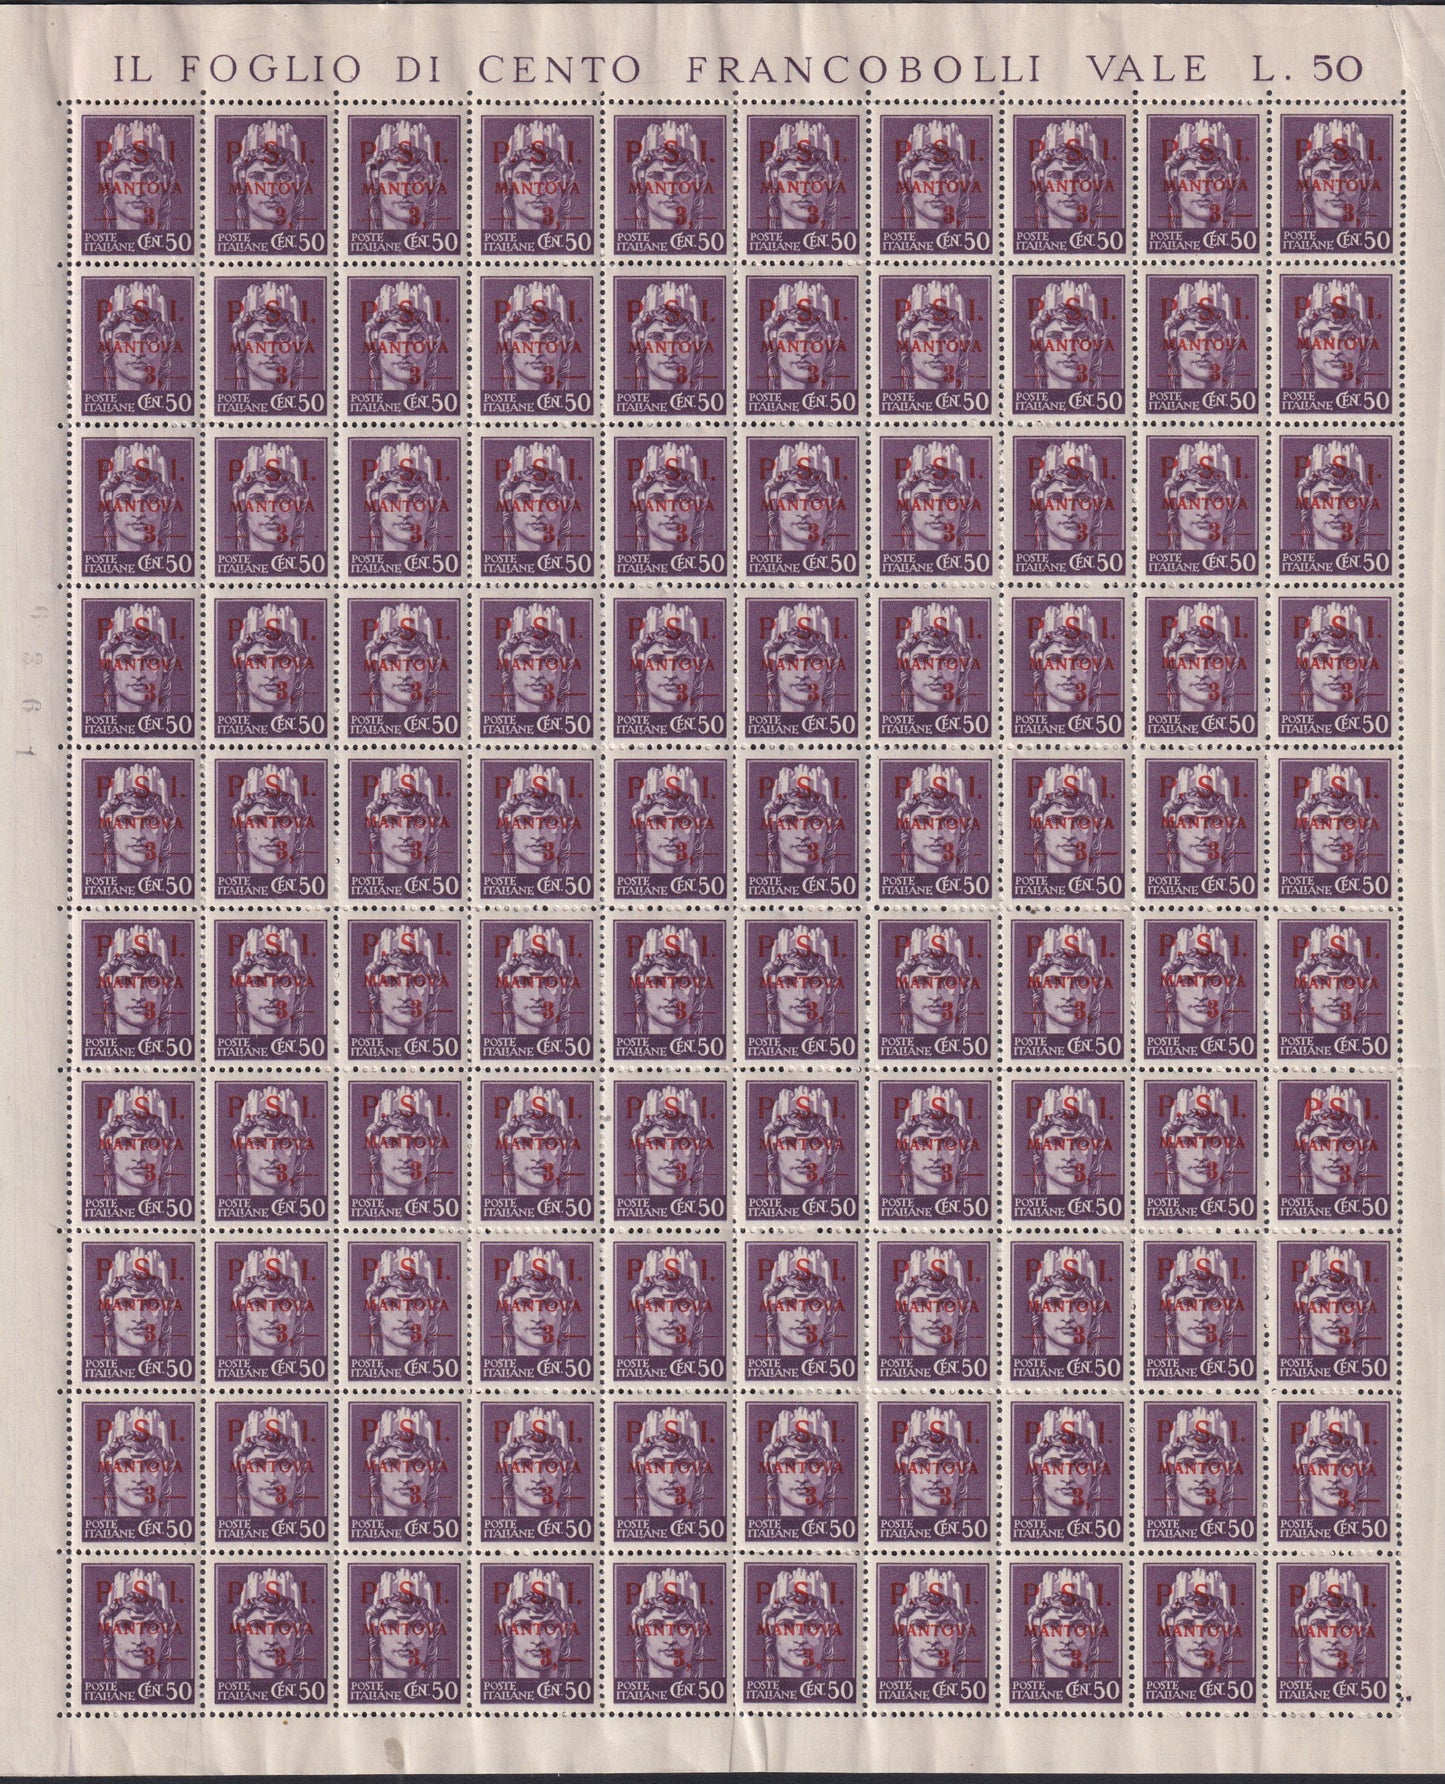 CLN93 - CLN Mantua, Imperiale L.3,00 on c. 50 violet complete sheet of 100 copies, including all possible varieties, new with intact gum (4)